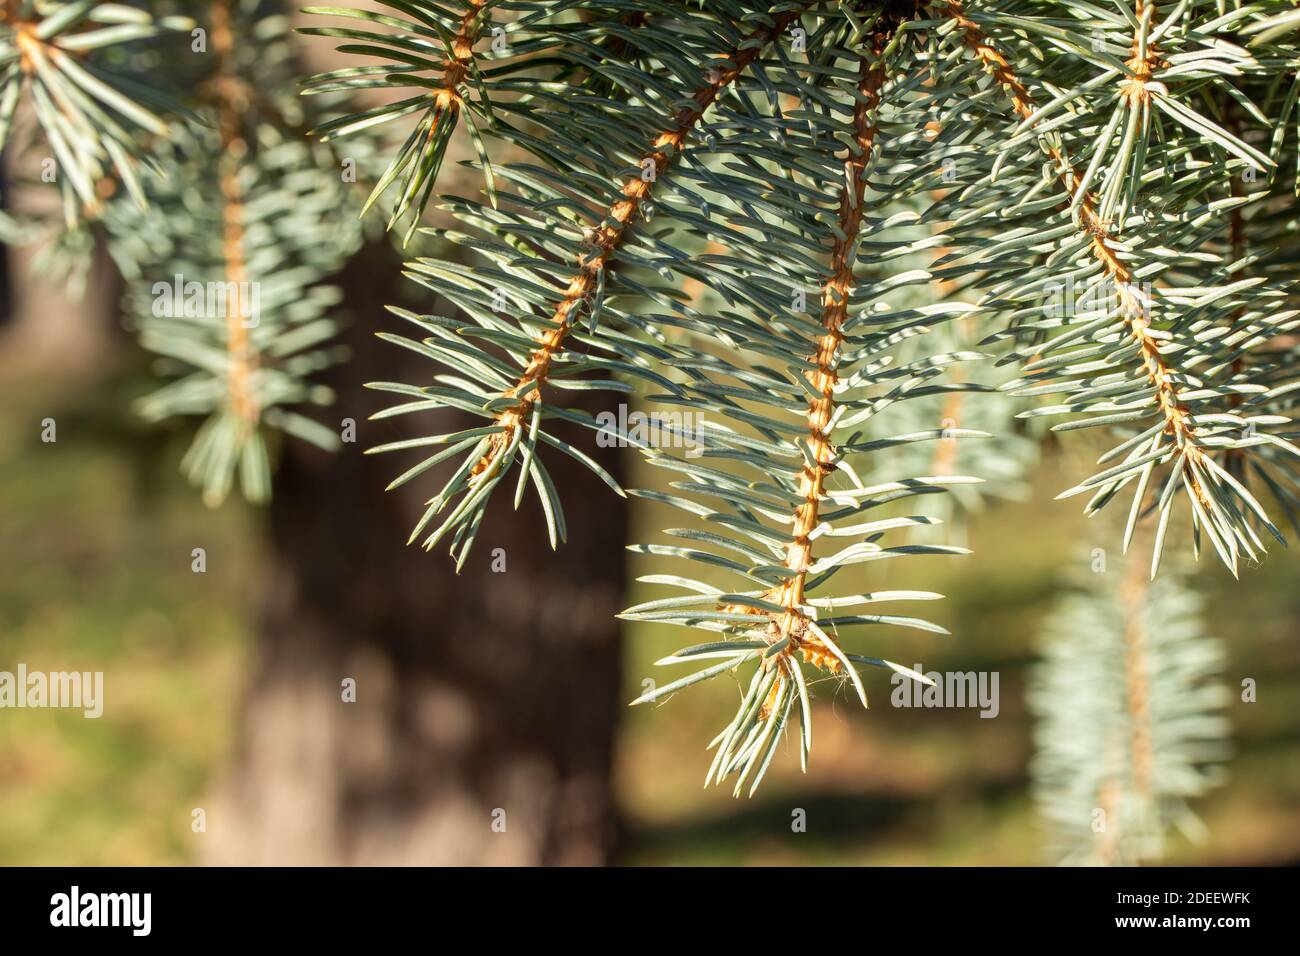 Full frame abstract texture background of fresh needles and branches on a blue spruce tree in full sunlight Stock Photo